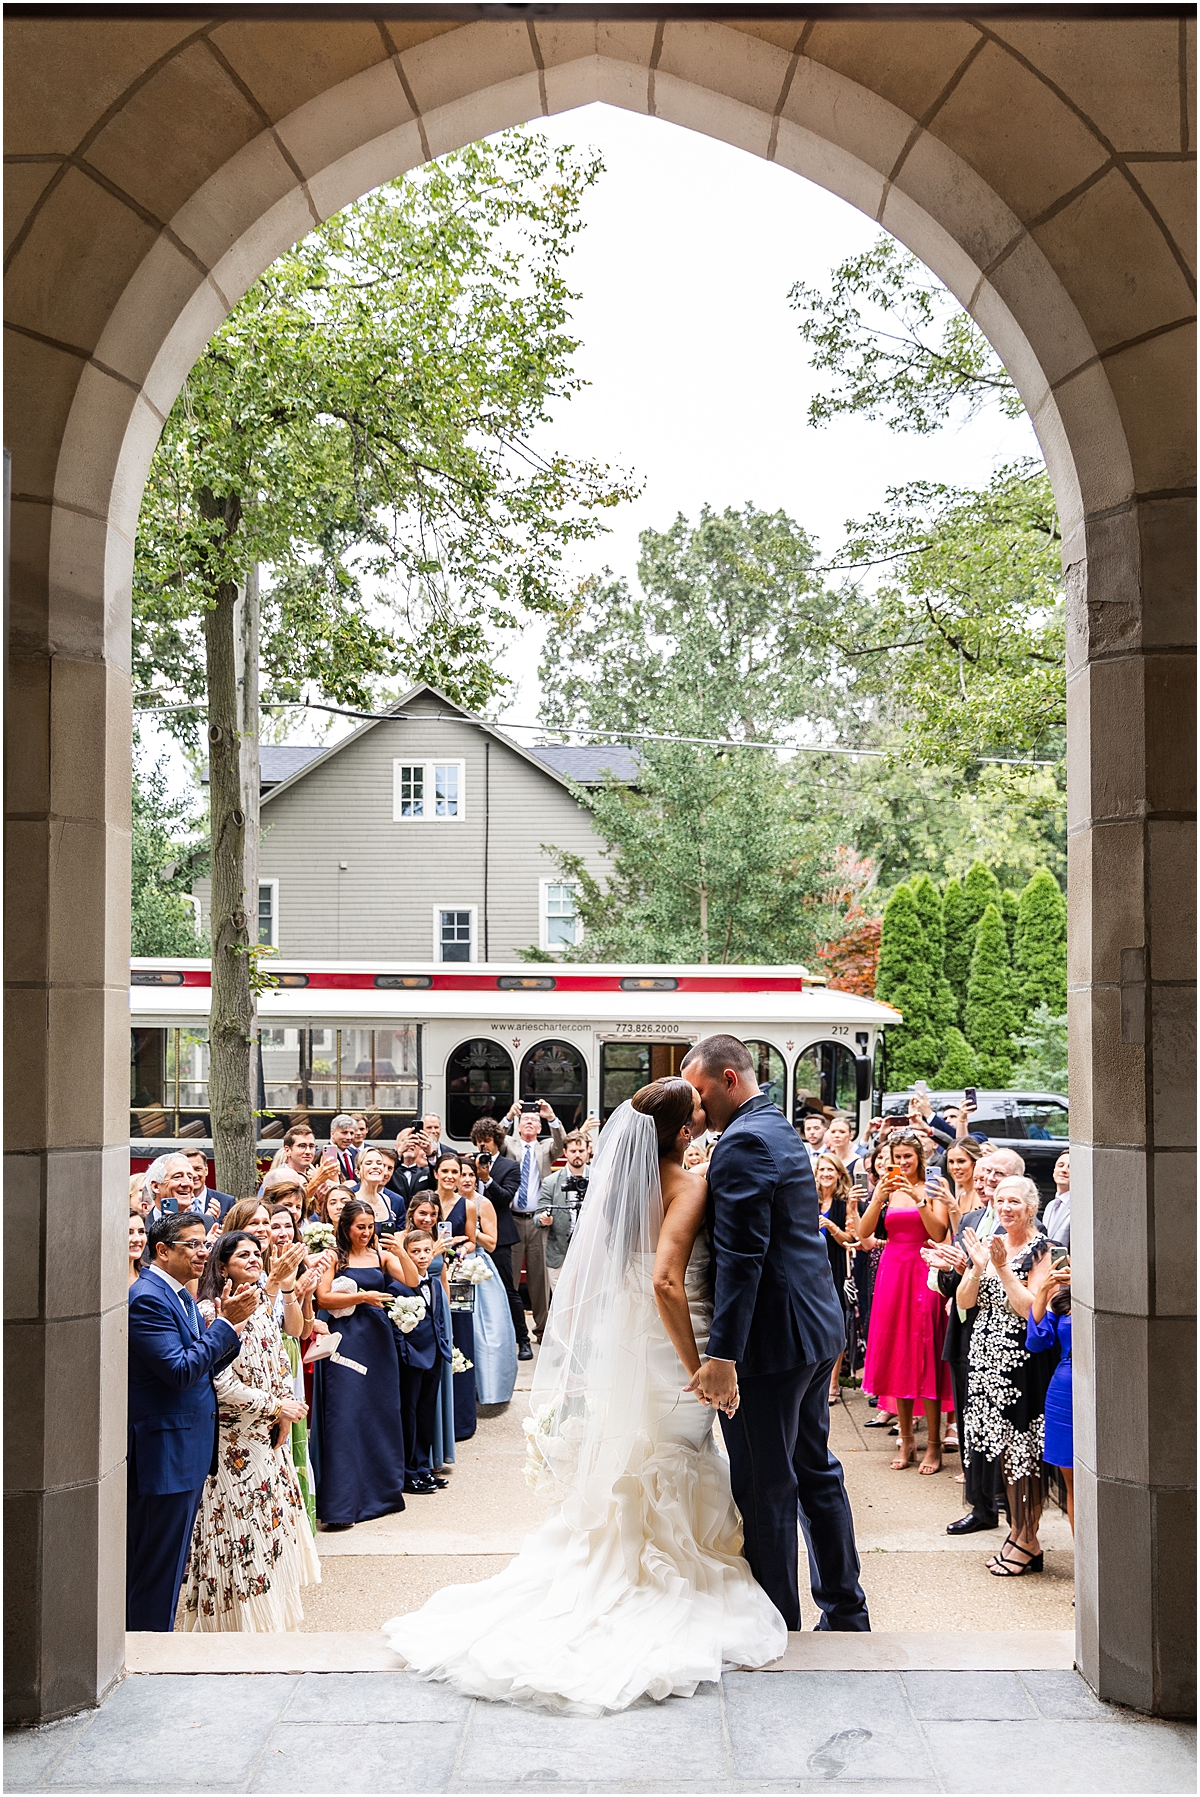 newlyweds kiss as they exit church ceremony